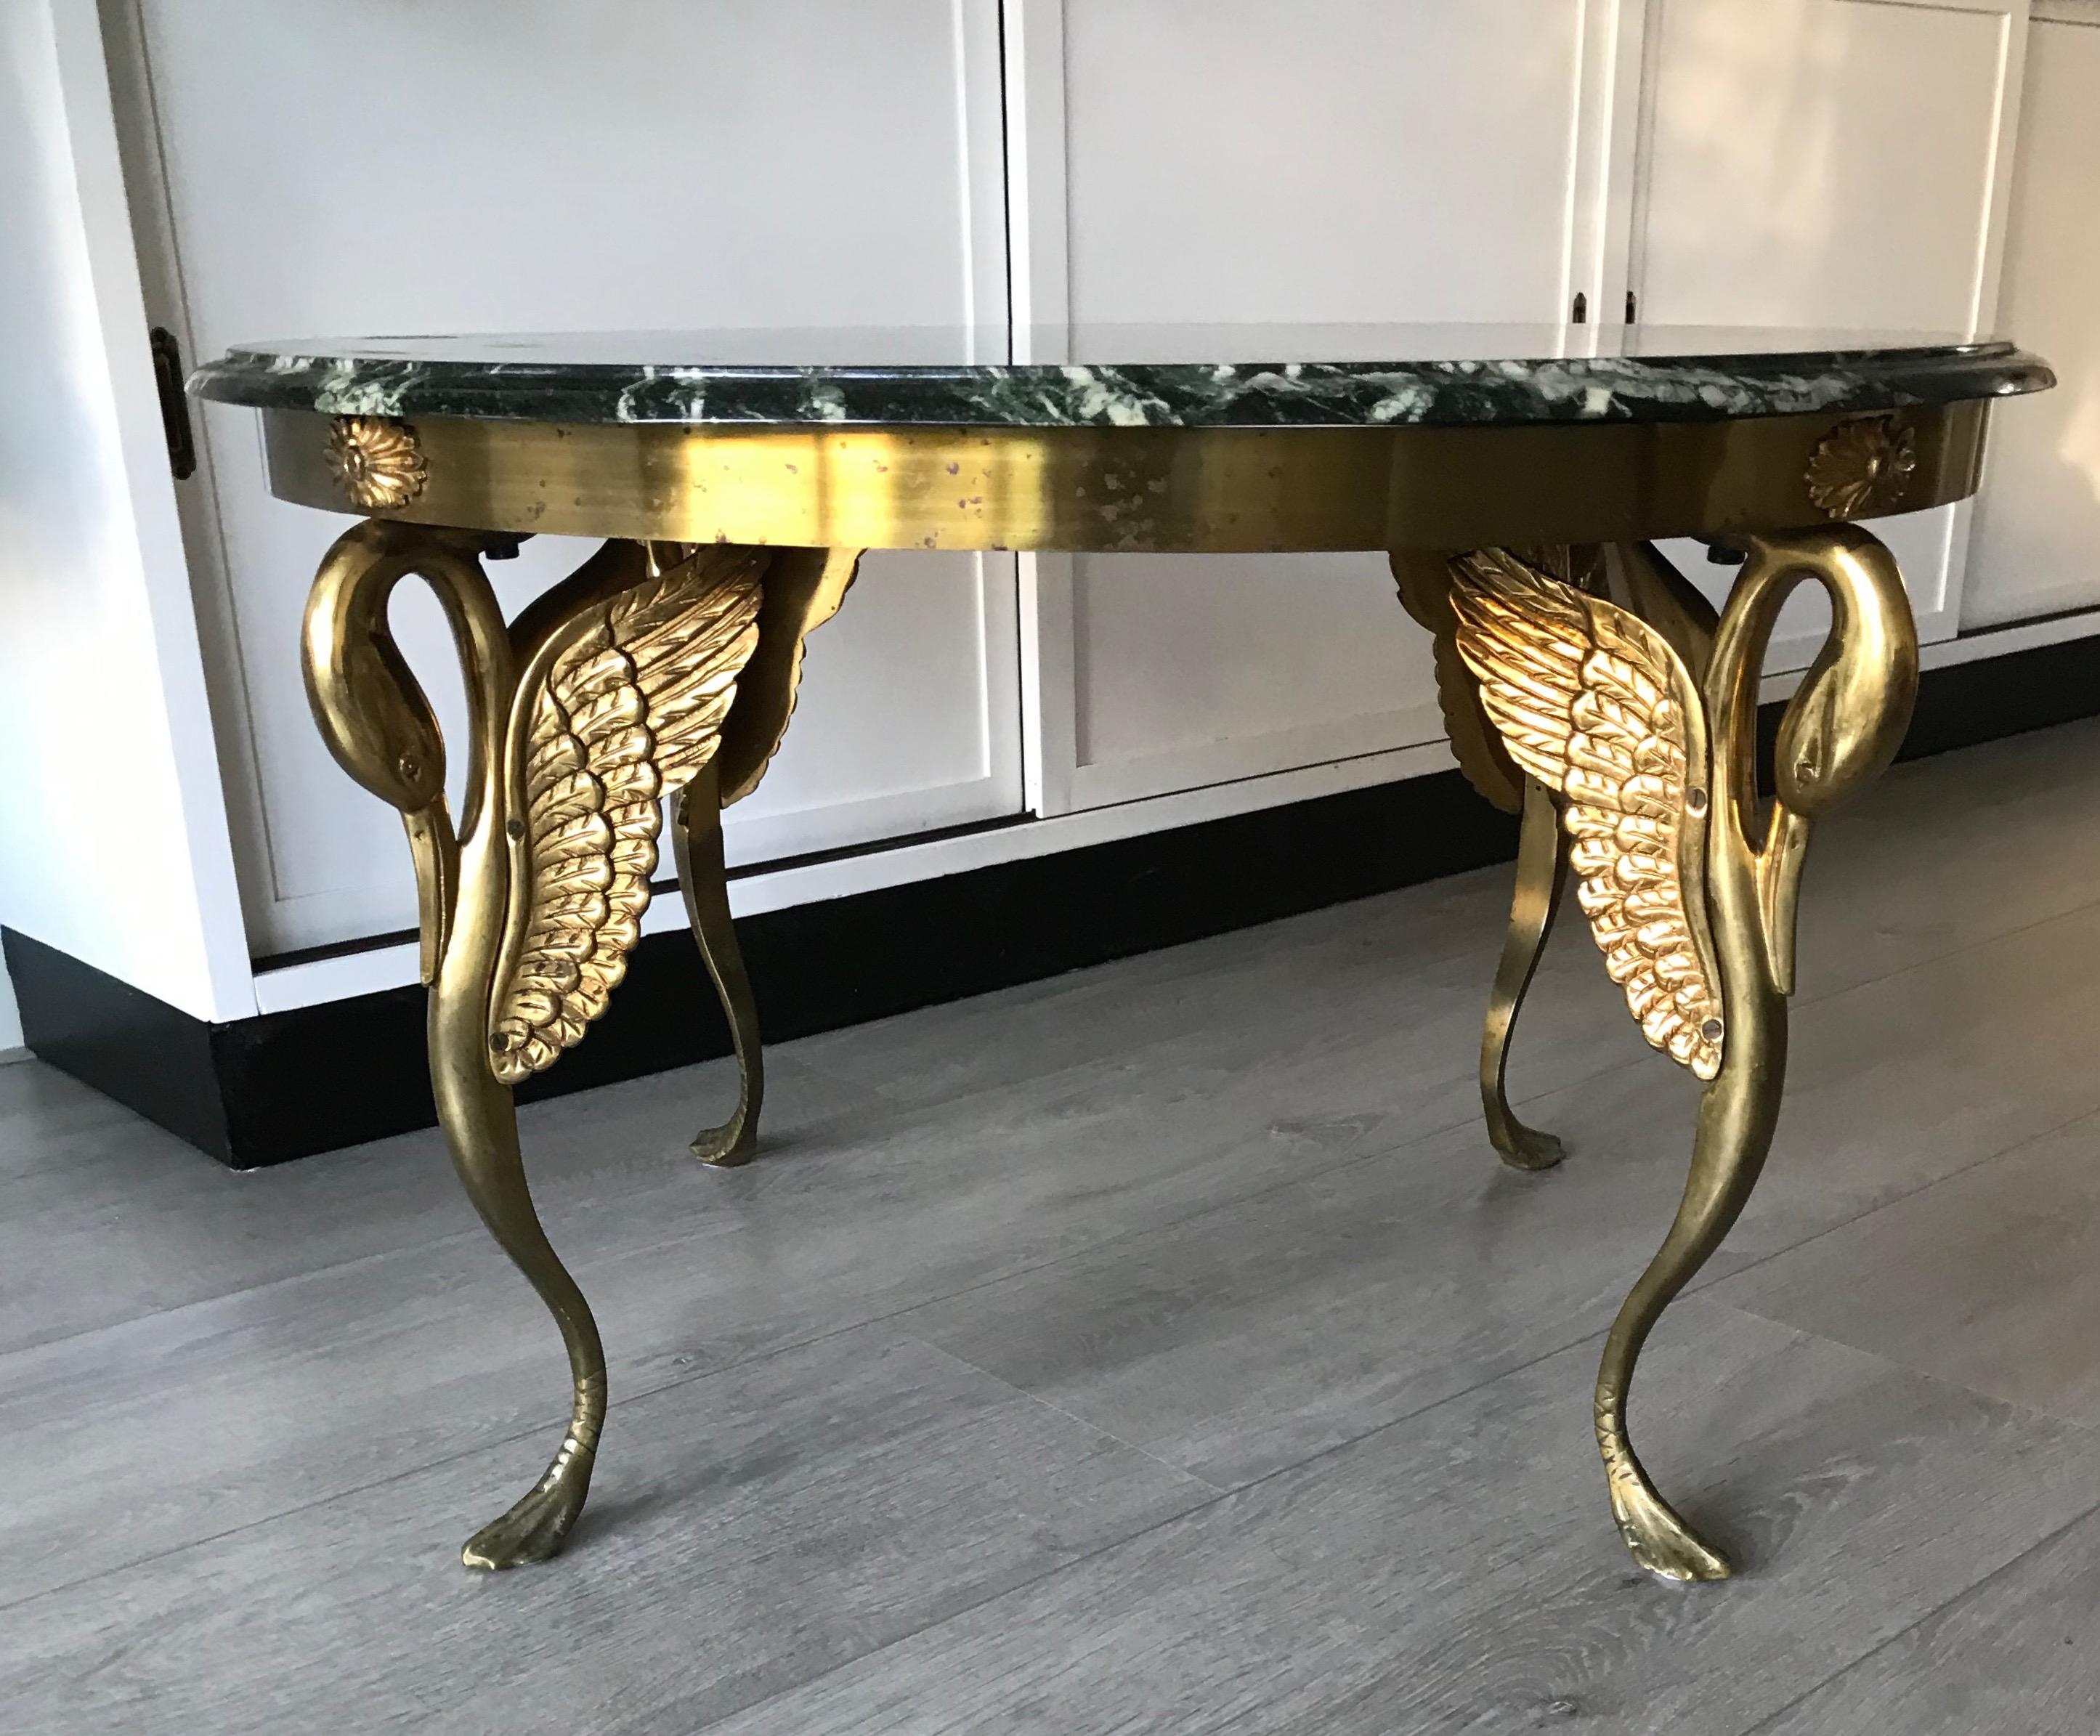 Midcentury Empire Style Coffee Table with Marble Top and Bronze Swan Sculptures 7